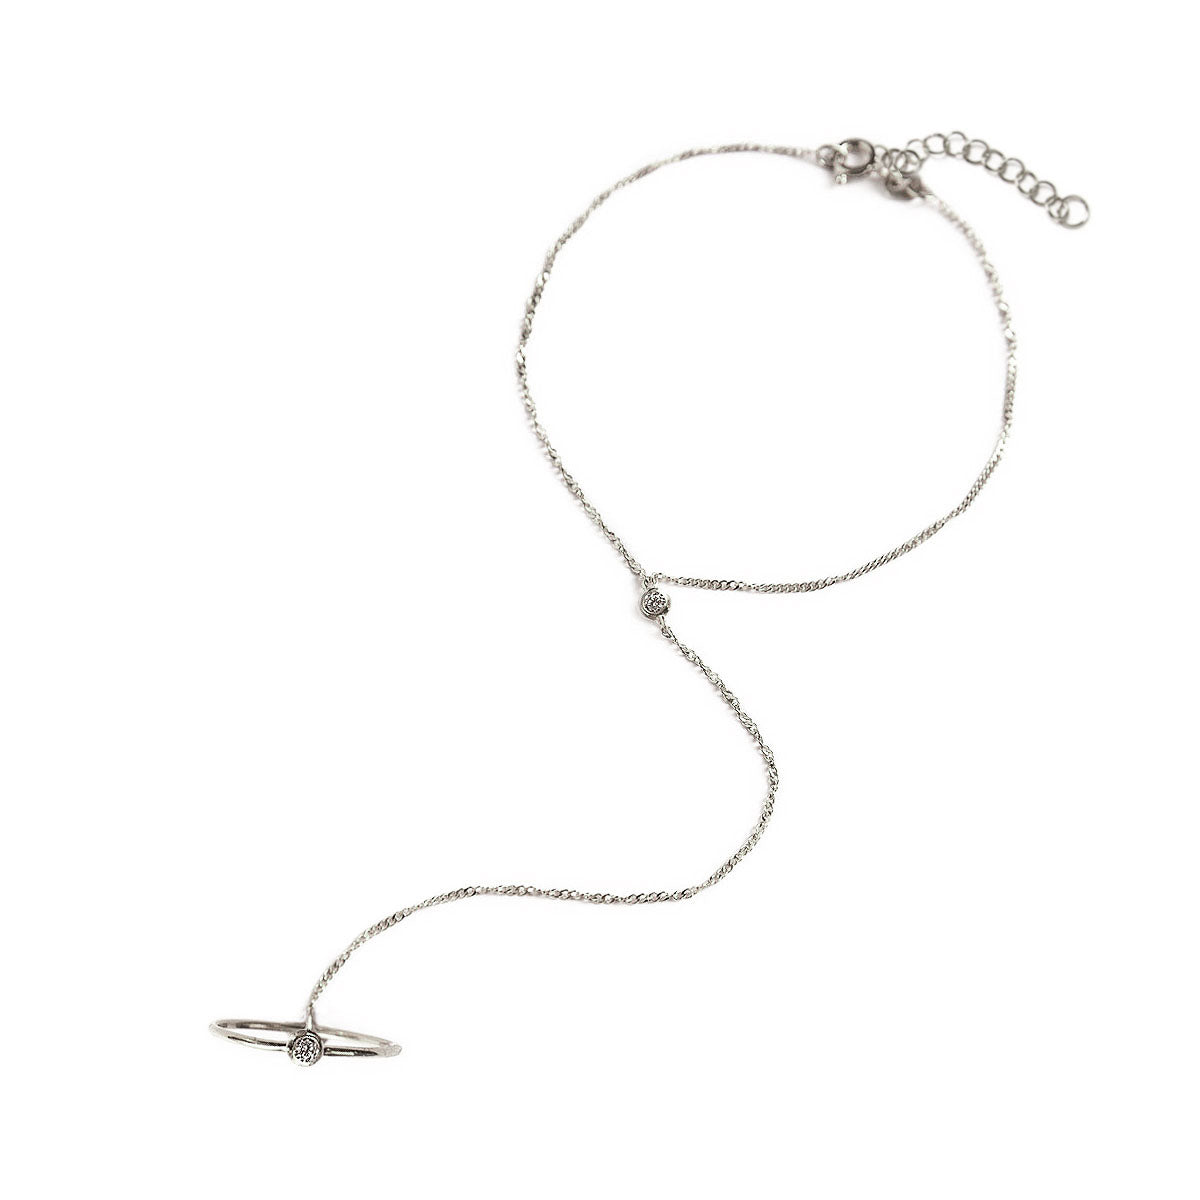 Silver Minimal Handchain featuring attached Ring with Cubic Zirconia crystal